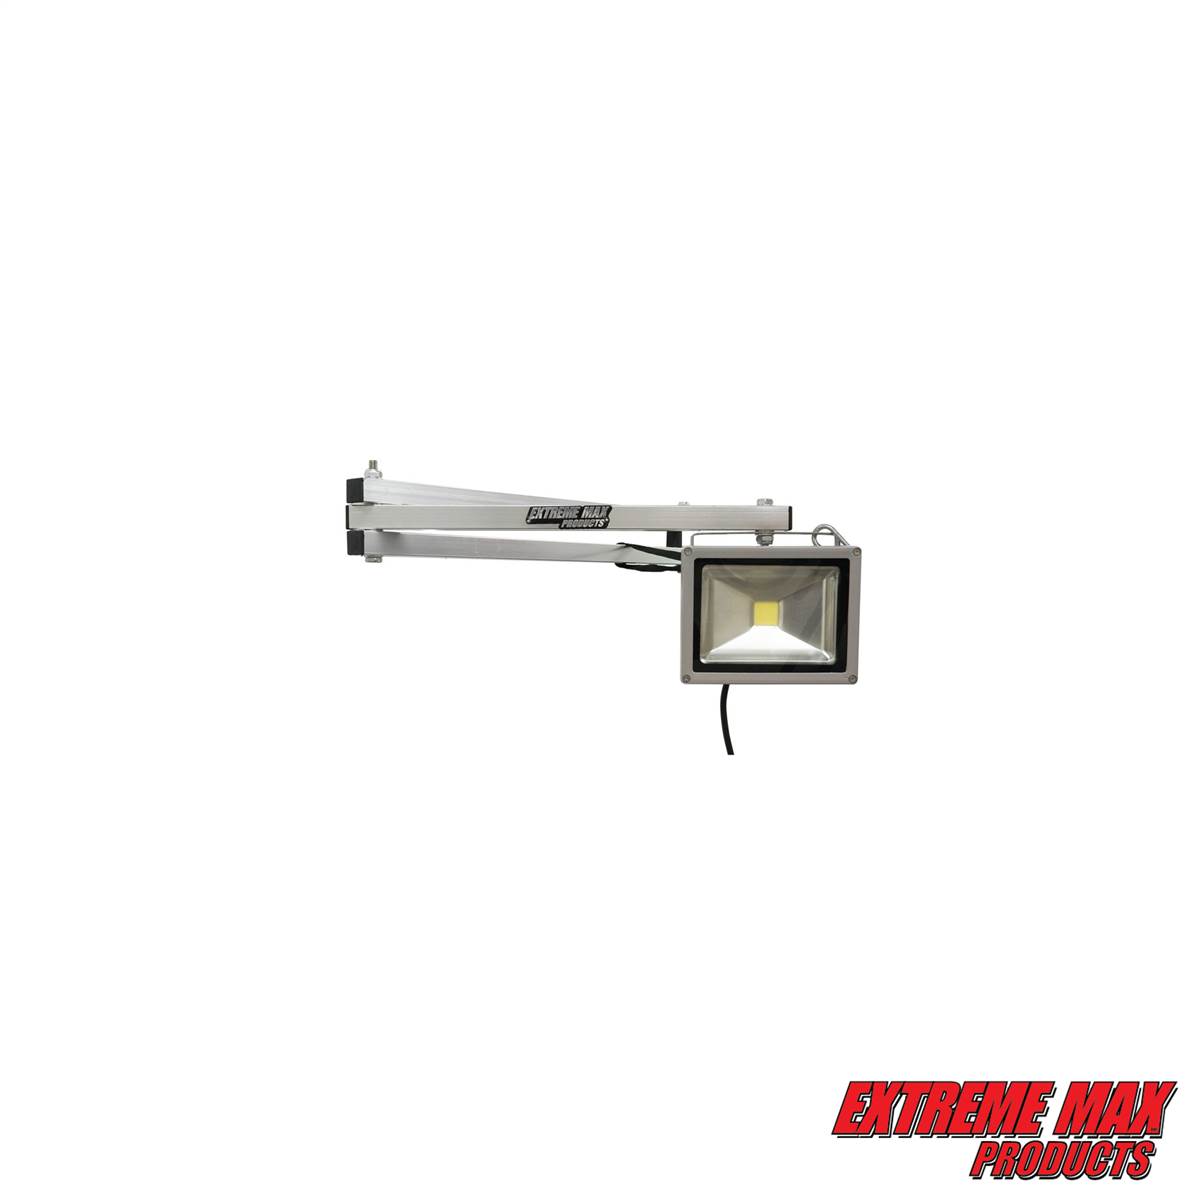 Extreme Max 5001.6065 Adjustable Aluminum Swing Arm LED Industrial Work Light for Warehouse Race Trailer Shop Garage Workbench